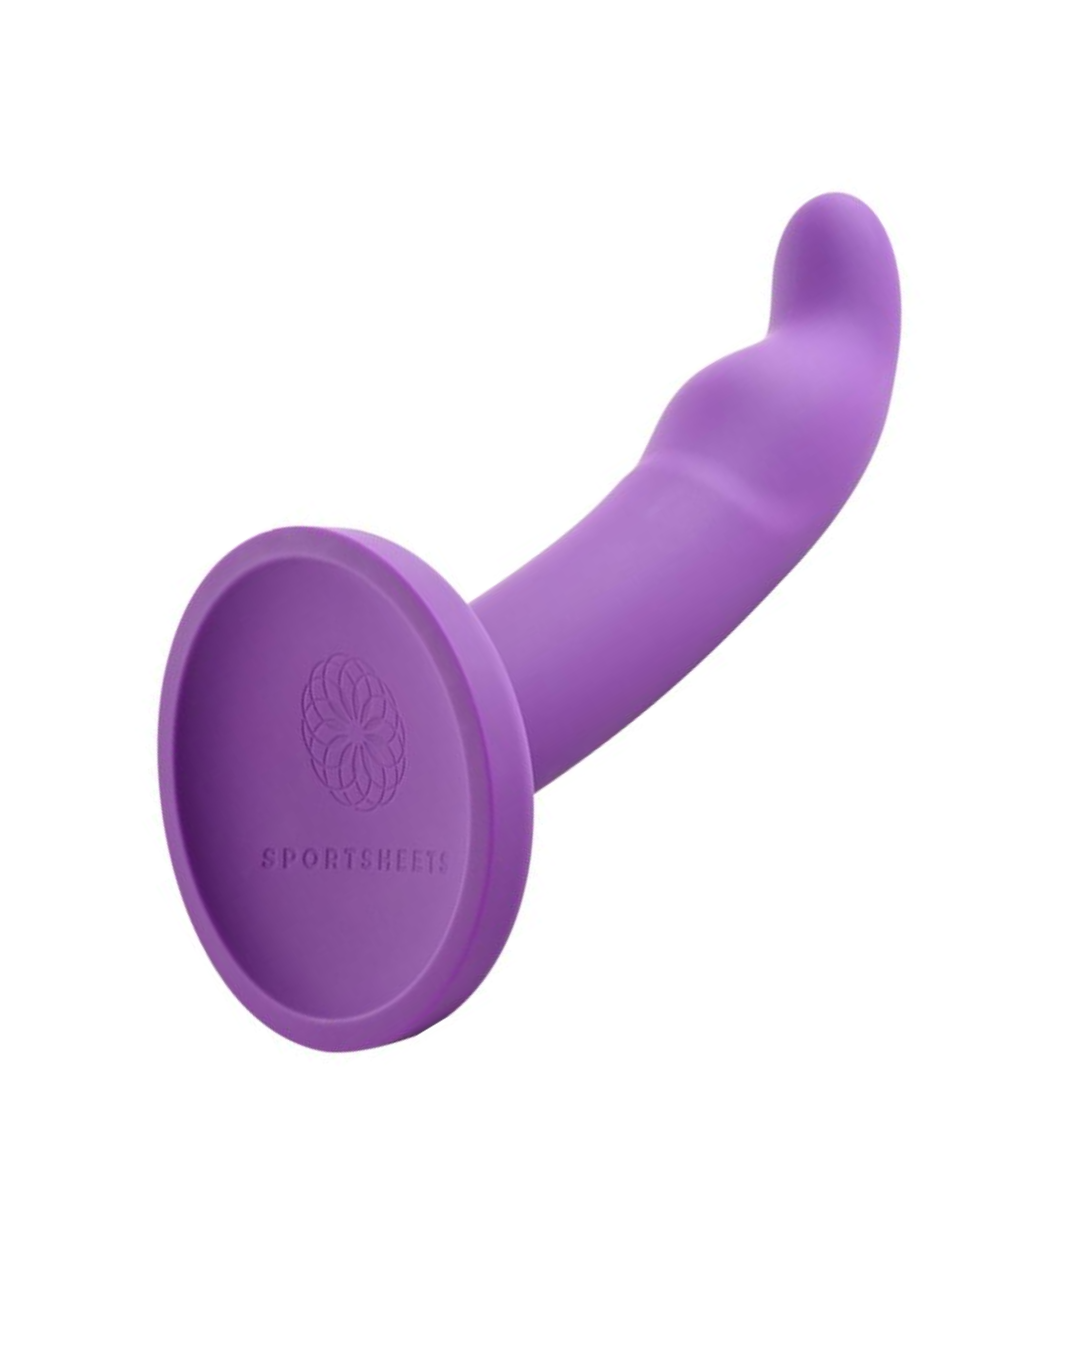 Sportsheets Astil 8" Silicone G-Spot & Prostate Dildo - Purple close up of the suction cup base